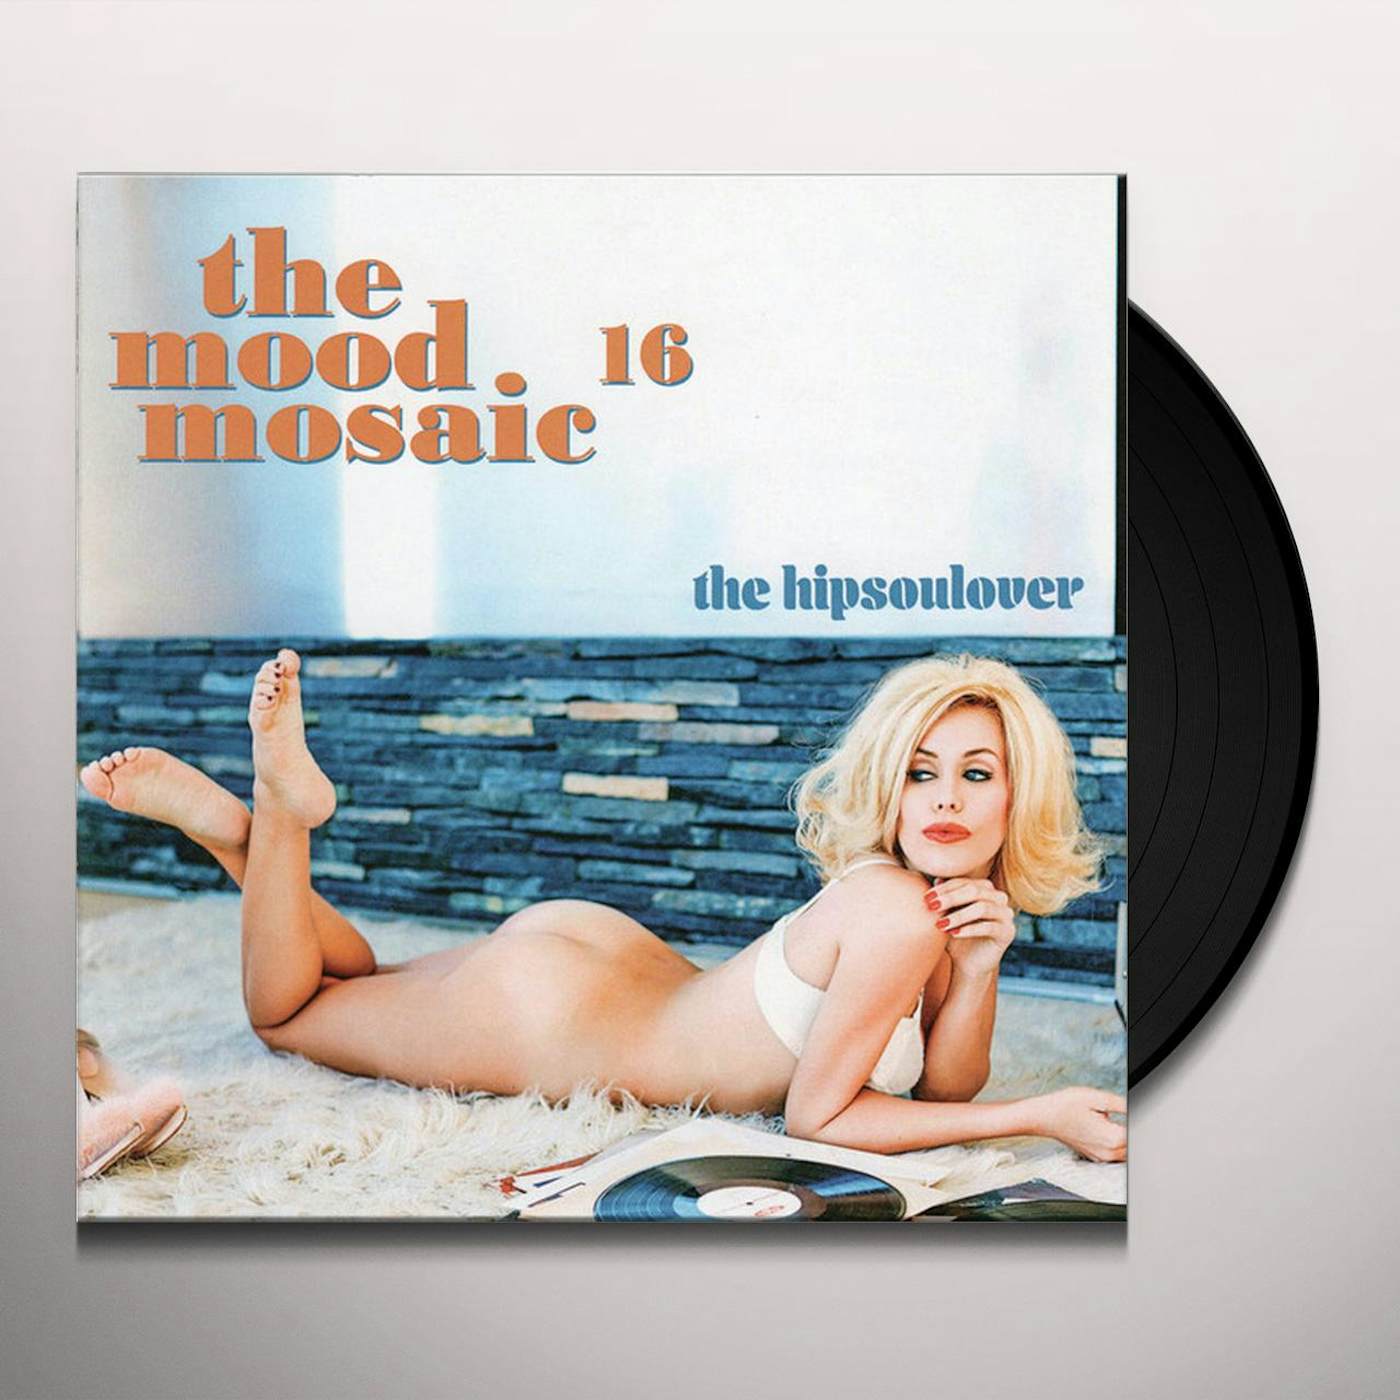 MOOD MOSAIC 16: THE HIPSOULOVER / VARIOUS Vinyl Record